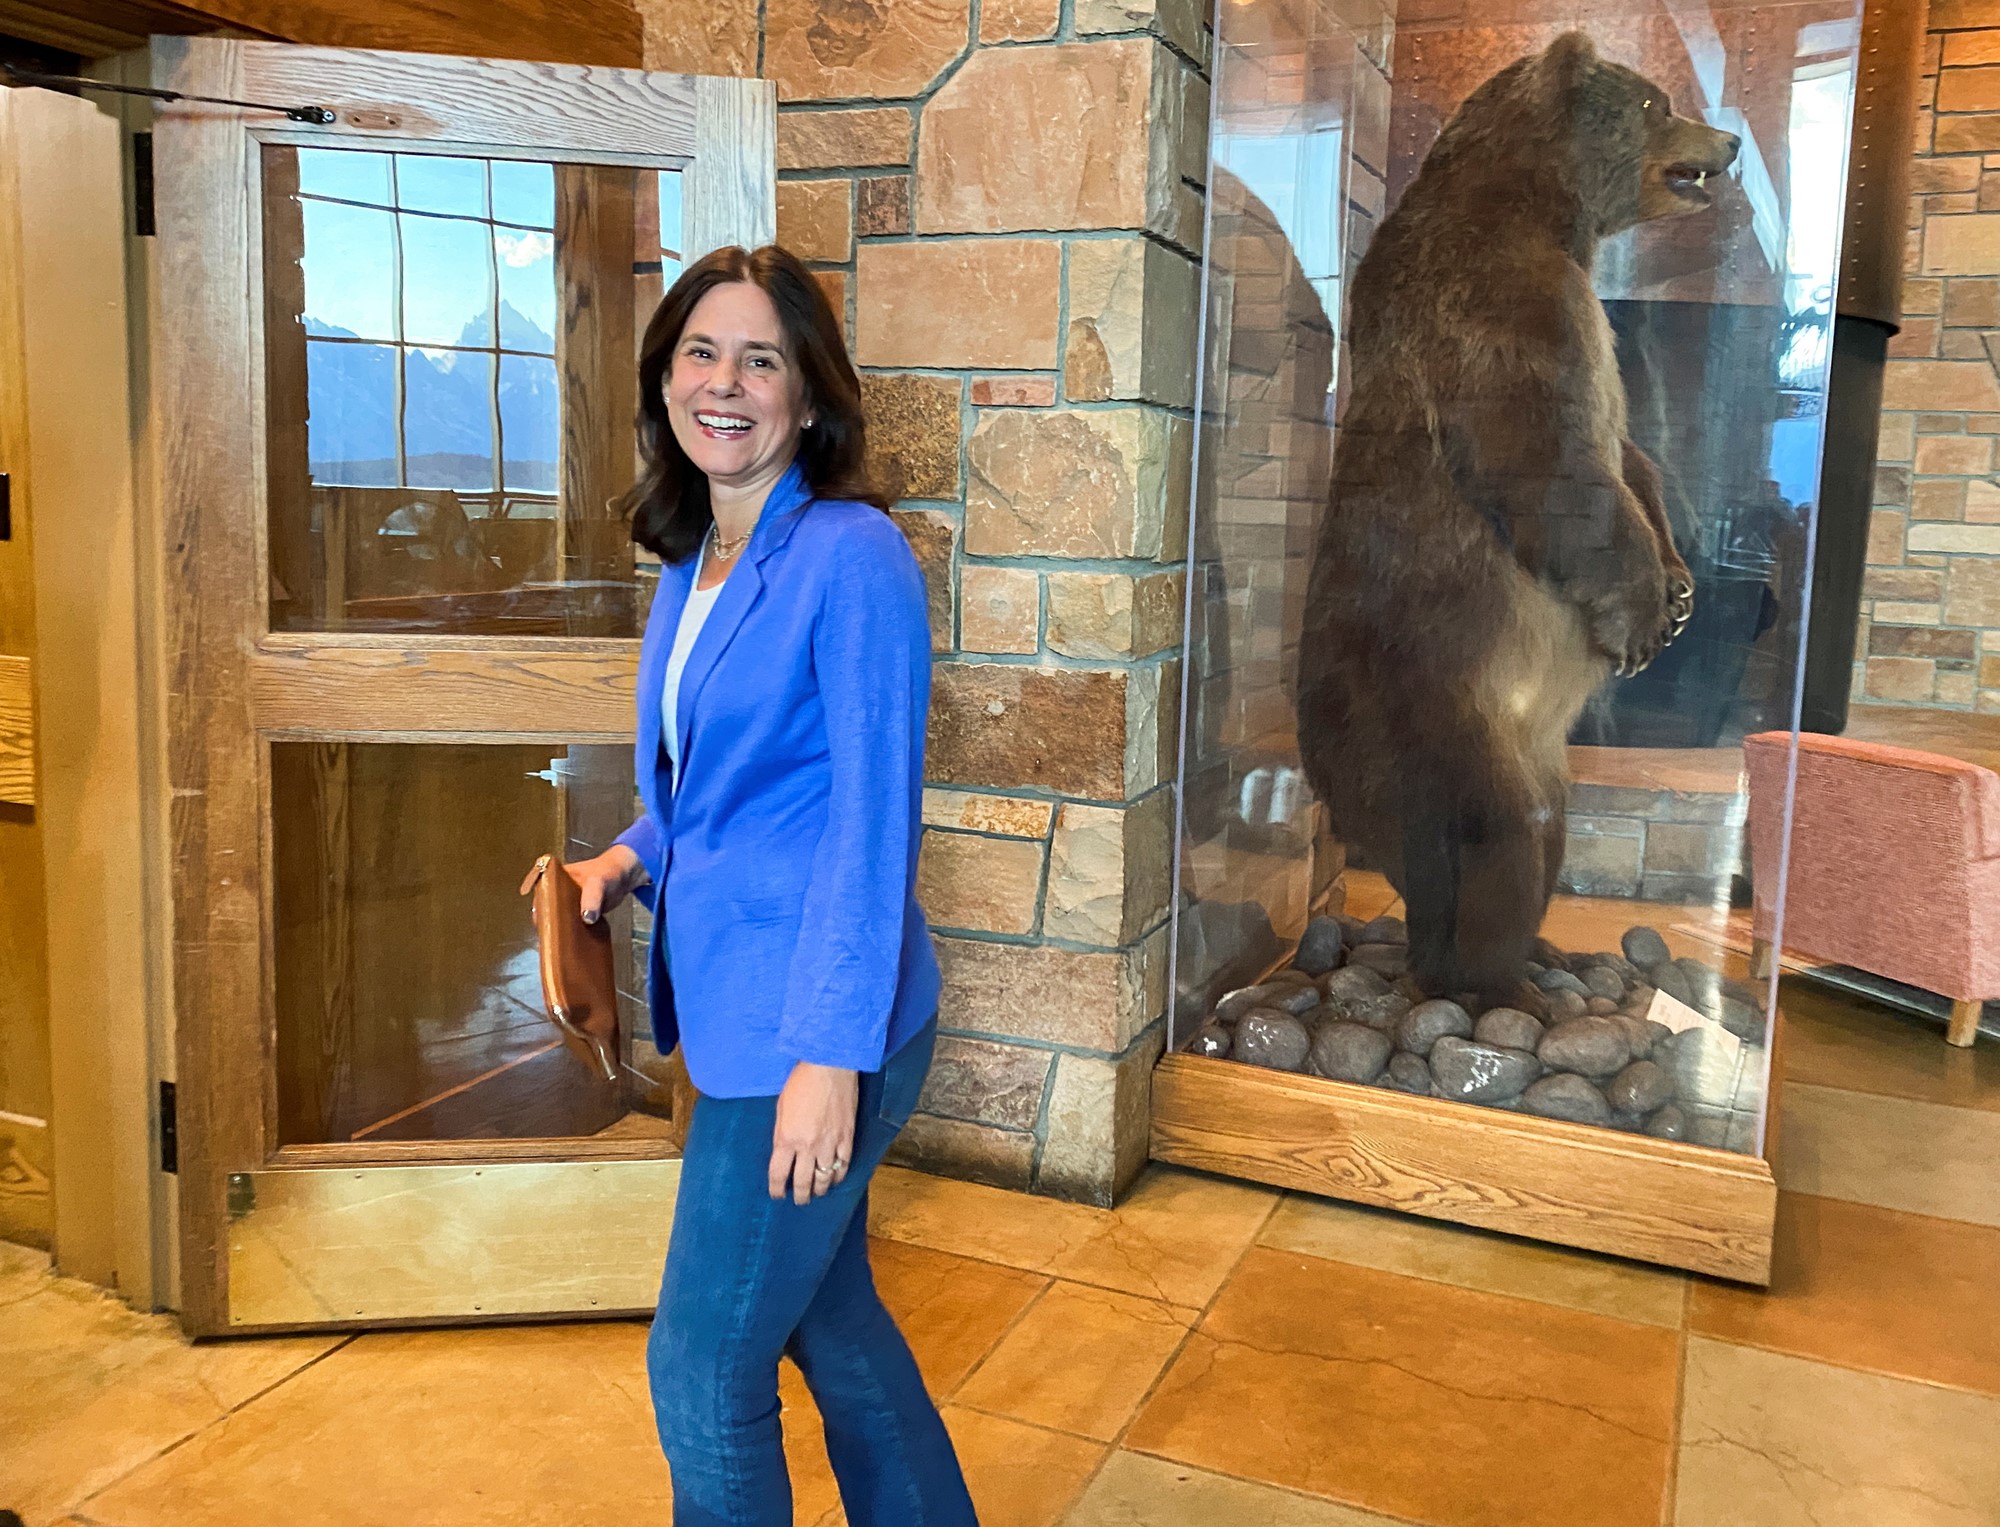 A woman wearing blue jeans and a blue blazer walks past a taxidermied bear in a lodge.